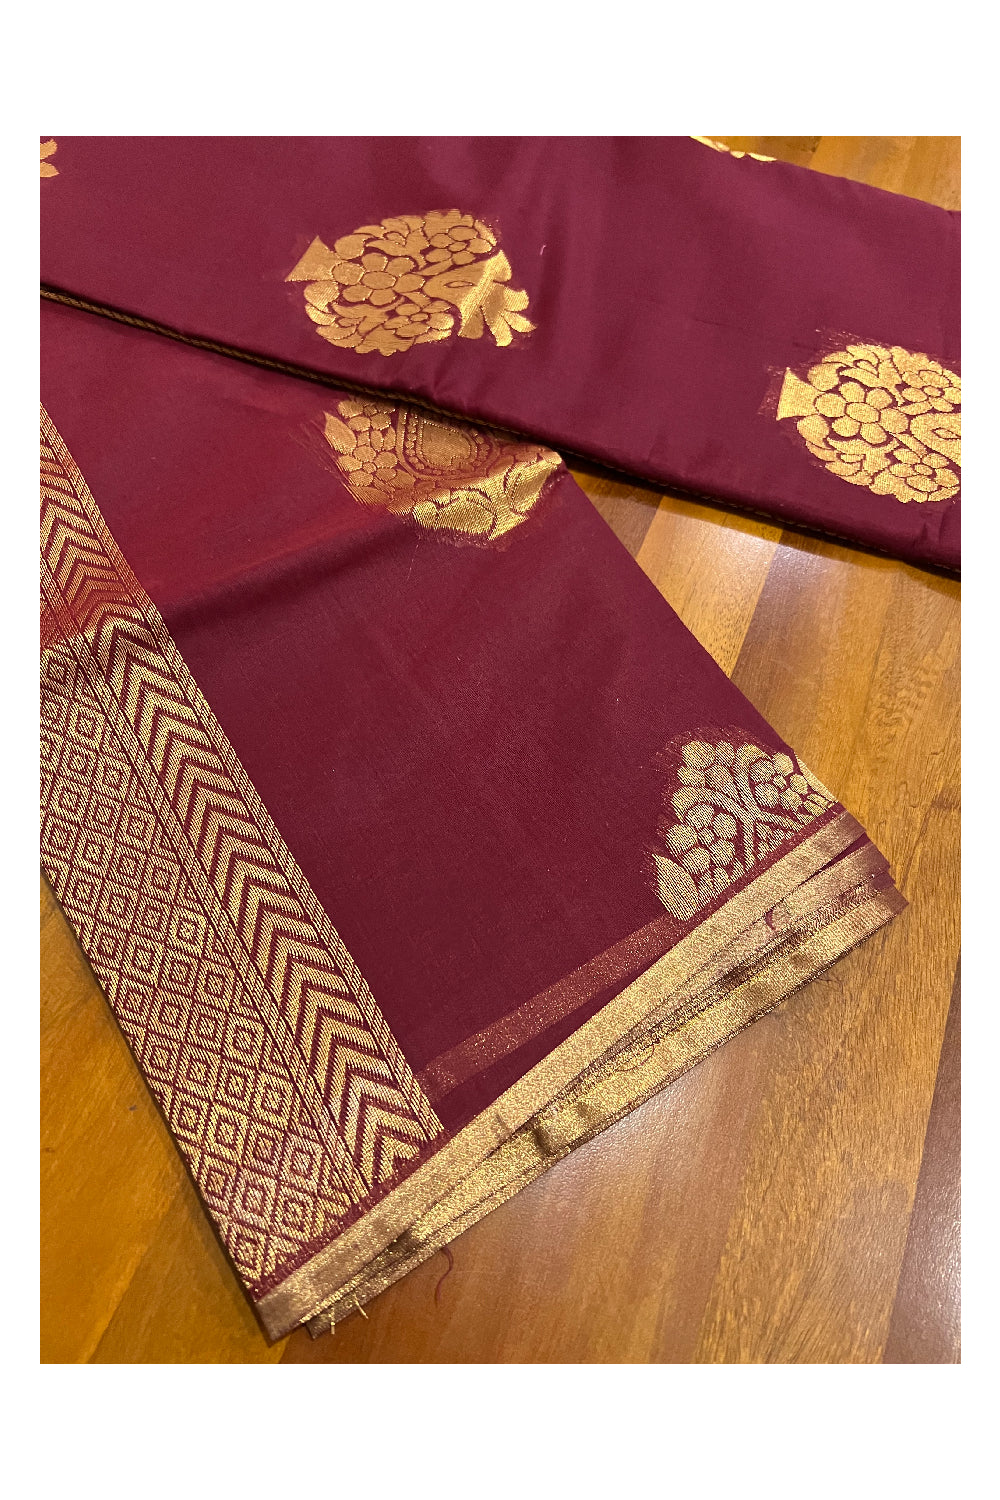 Southloom Maroon Cotton Silk Saree with Copper Kasavu Woven Works on Body